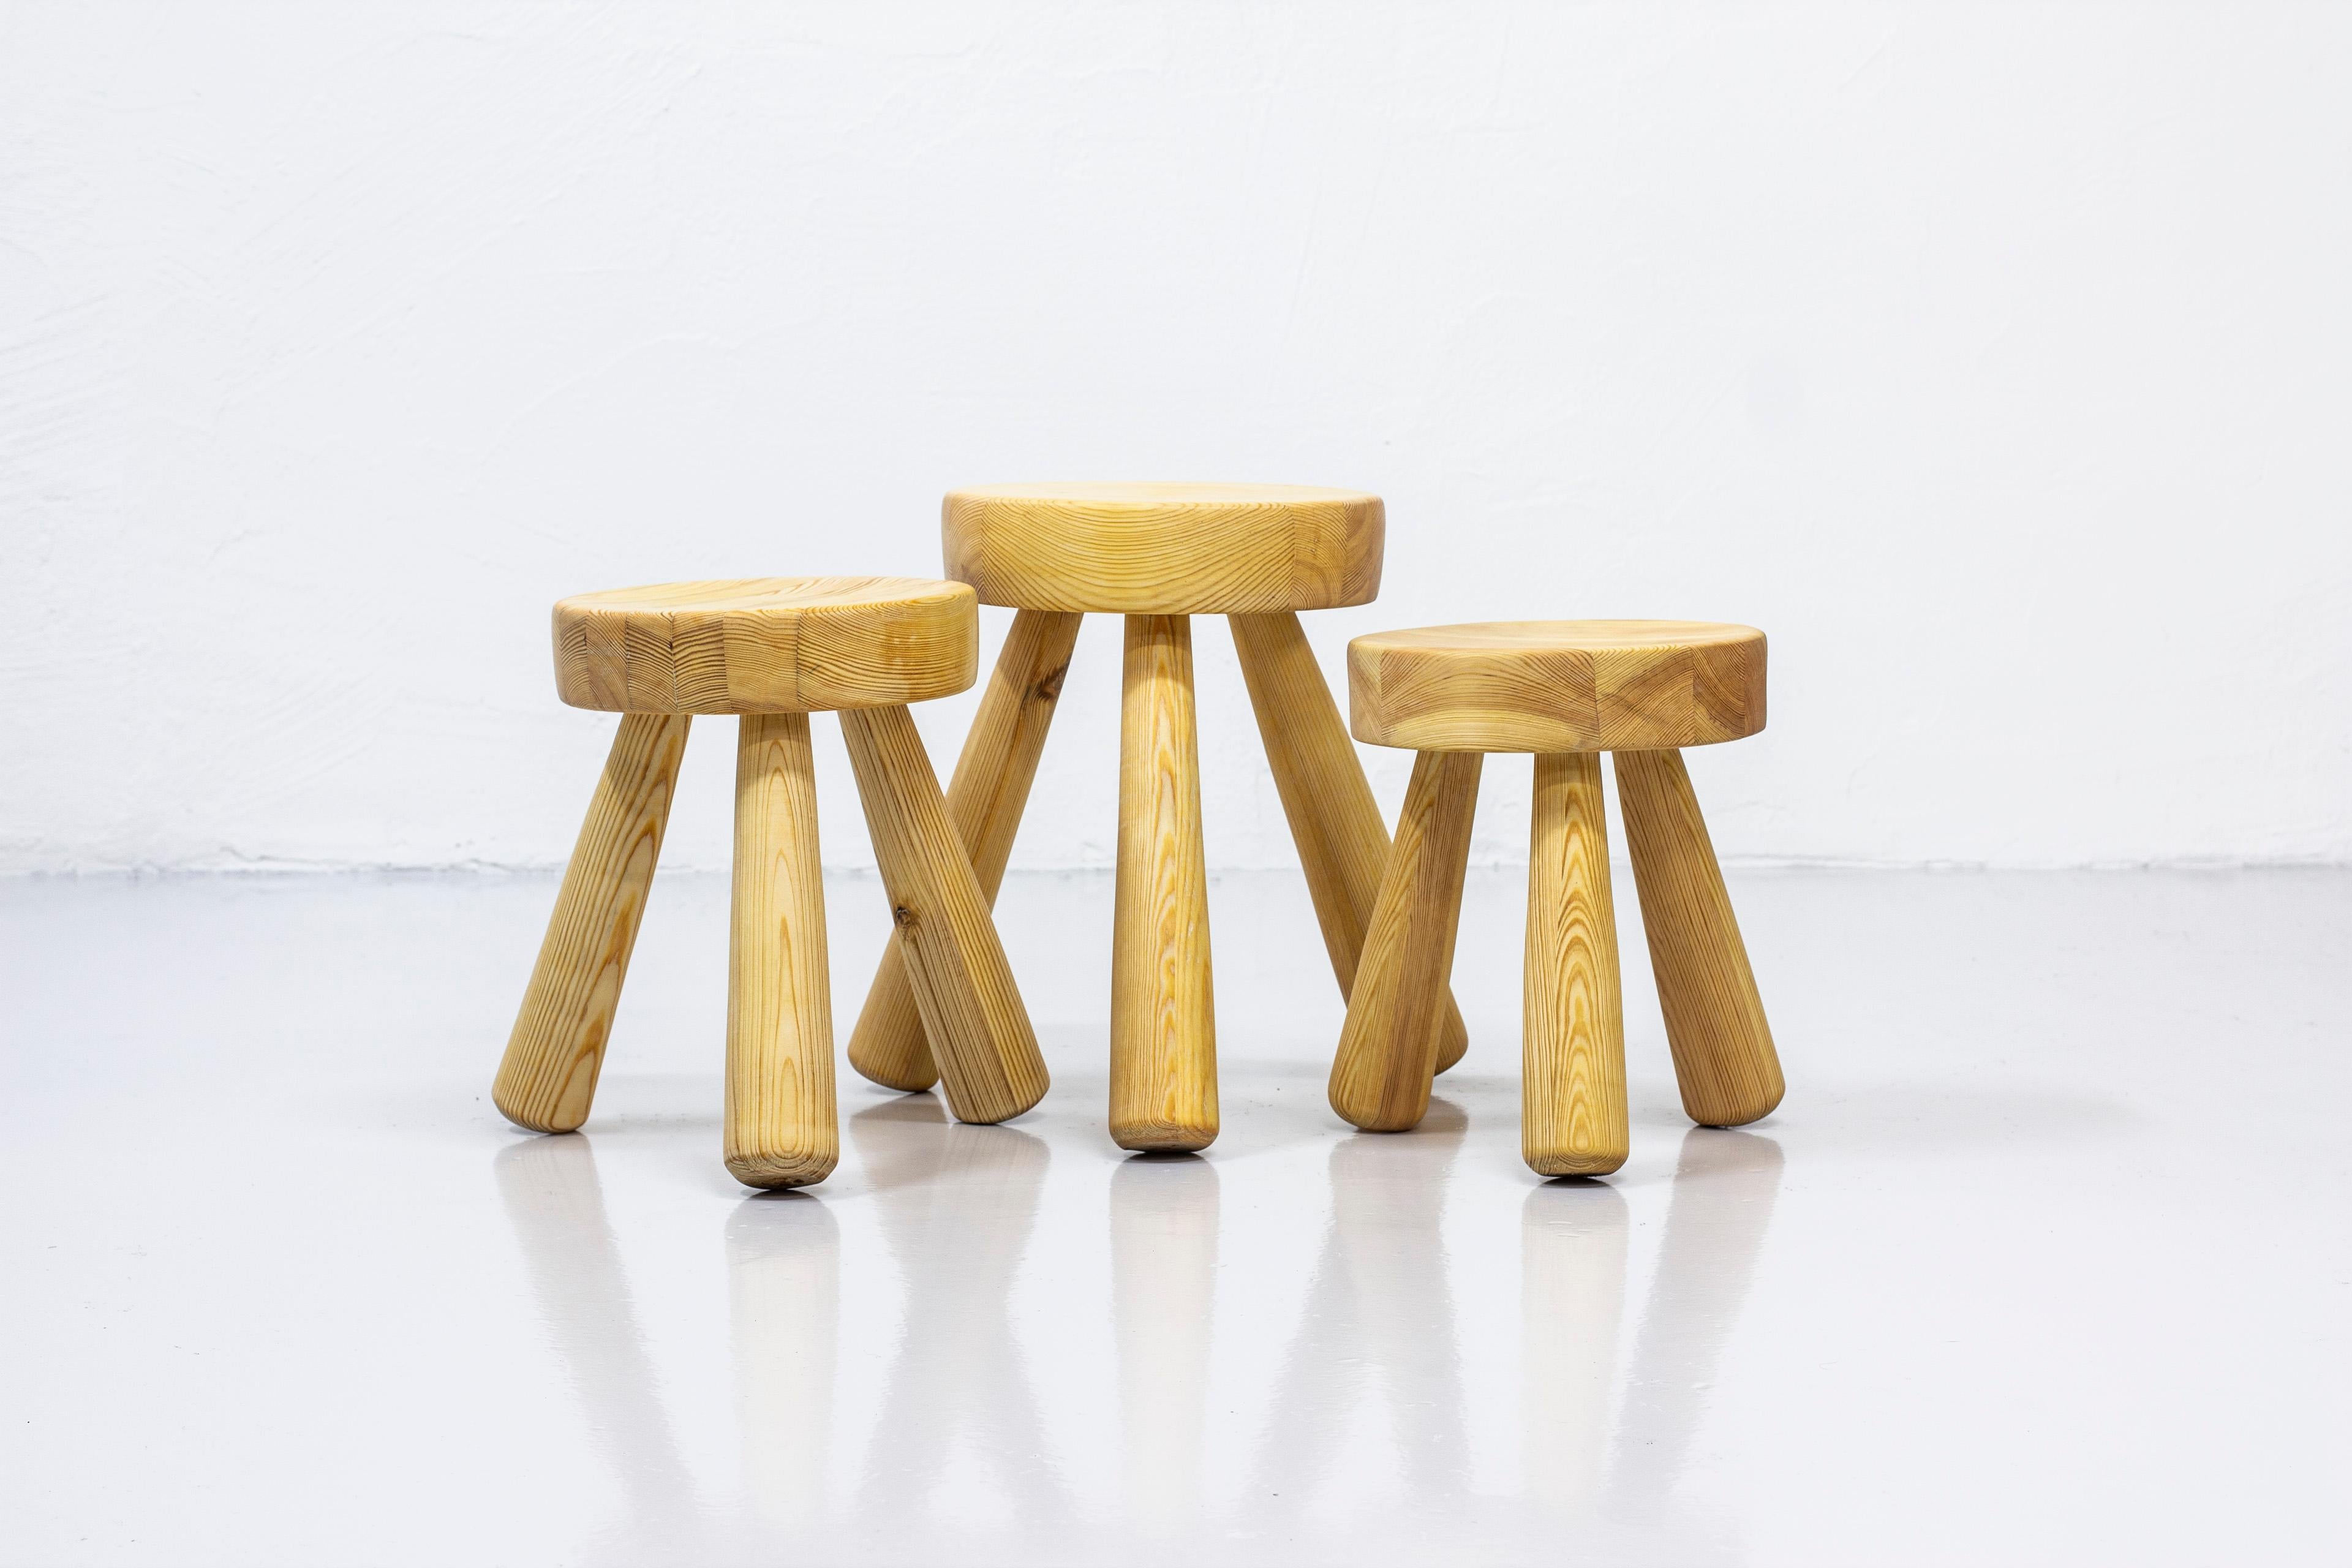 Stools designed and made by Ingvar Hildingsson. Made from hand turned solid pine wood. Very good condition with few signs of age related wear and patina. Three different sizes.

Dimensions: Ø. 26/27/29 W. ca 36/40/42 (in between the legs) H.